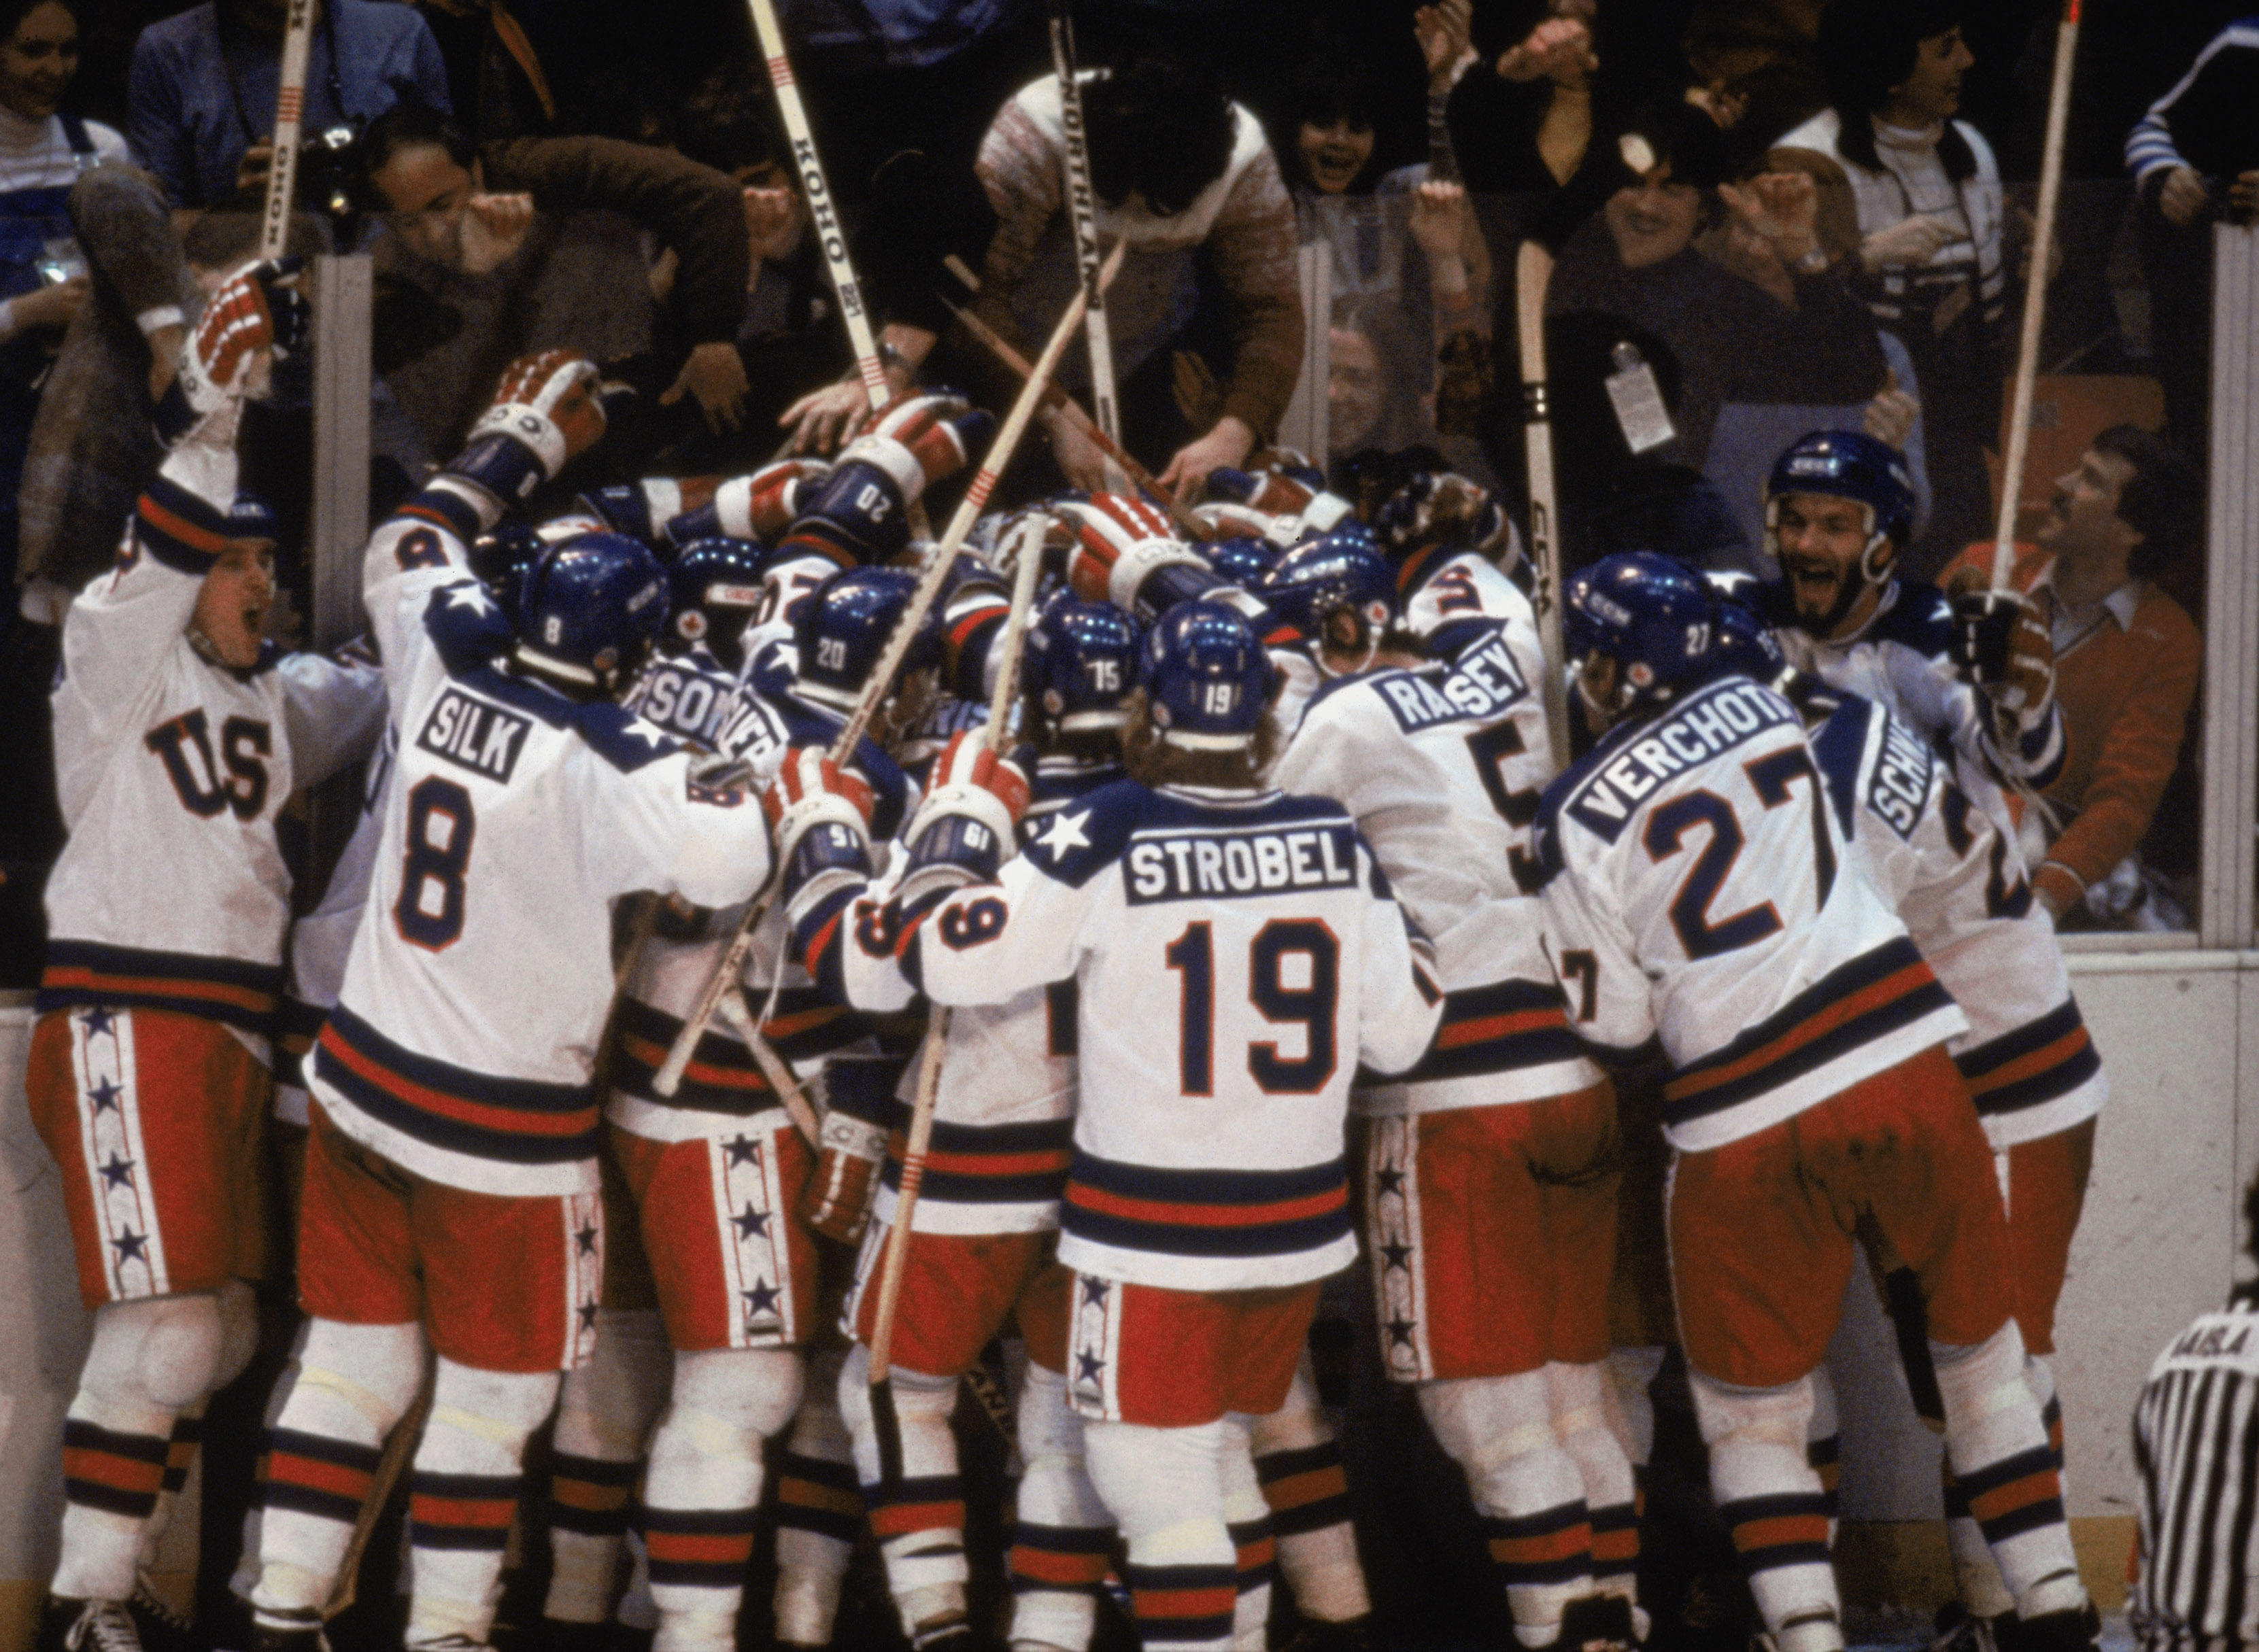 1980 US Olympic hockey team to relive Miracle on Ice moment | kare11.com